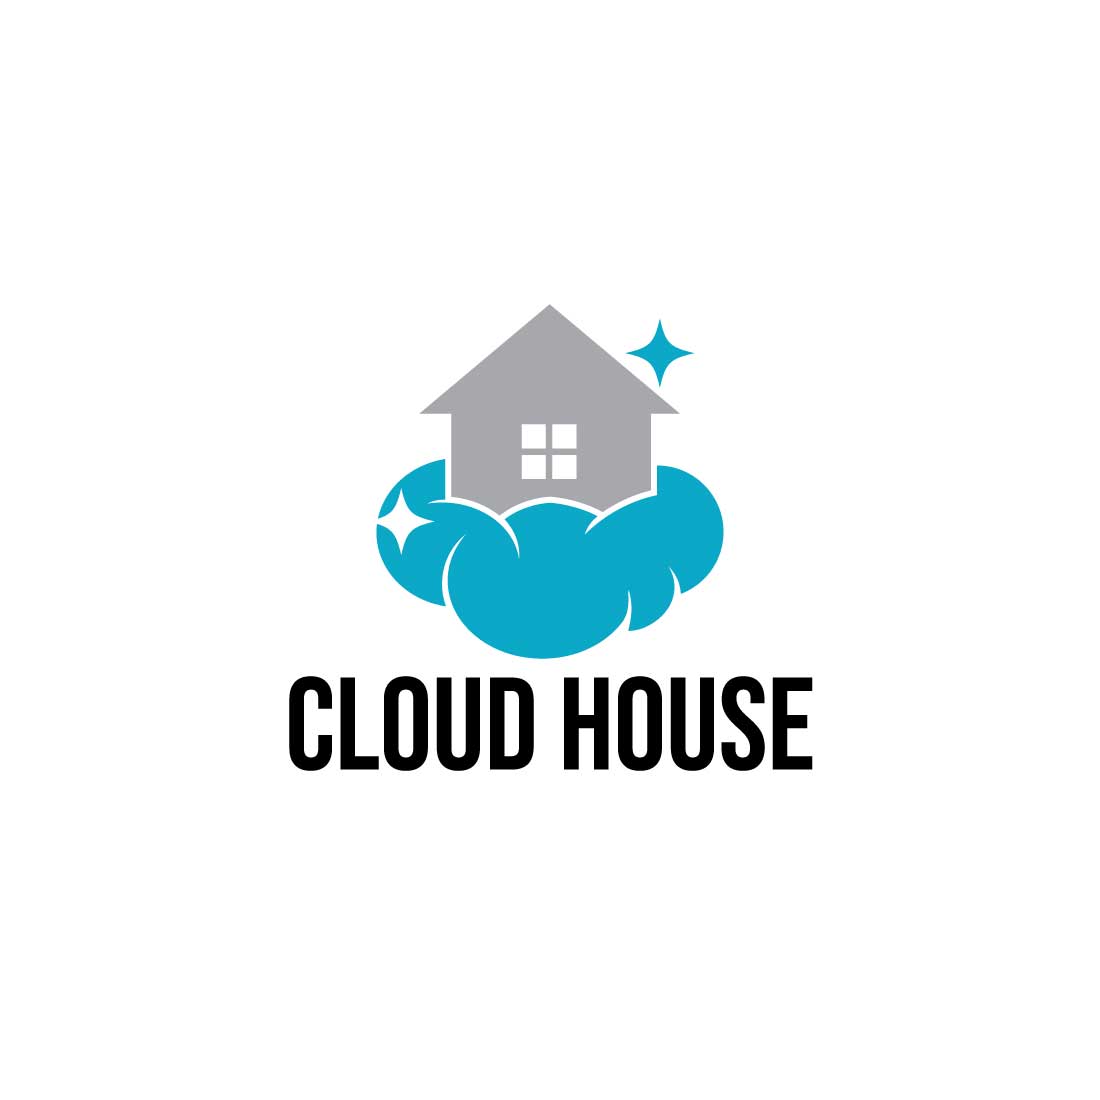 Minimal Flying Cloud House logo design preview image.